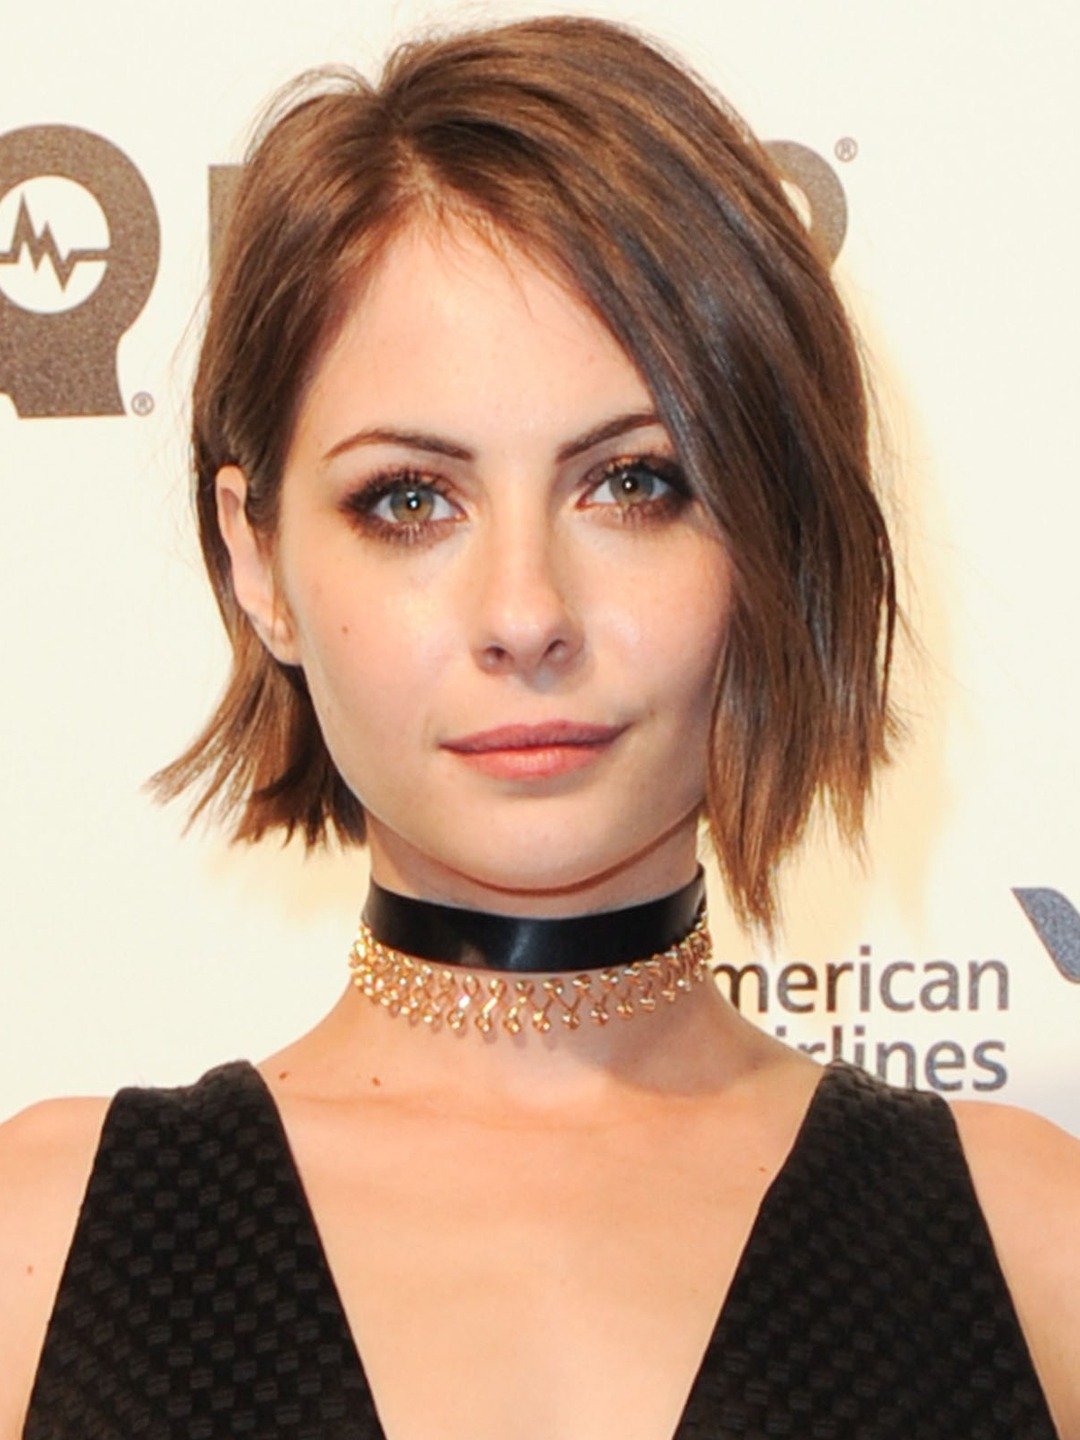 How tall is Willa Holland?